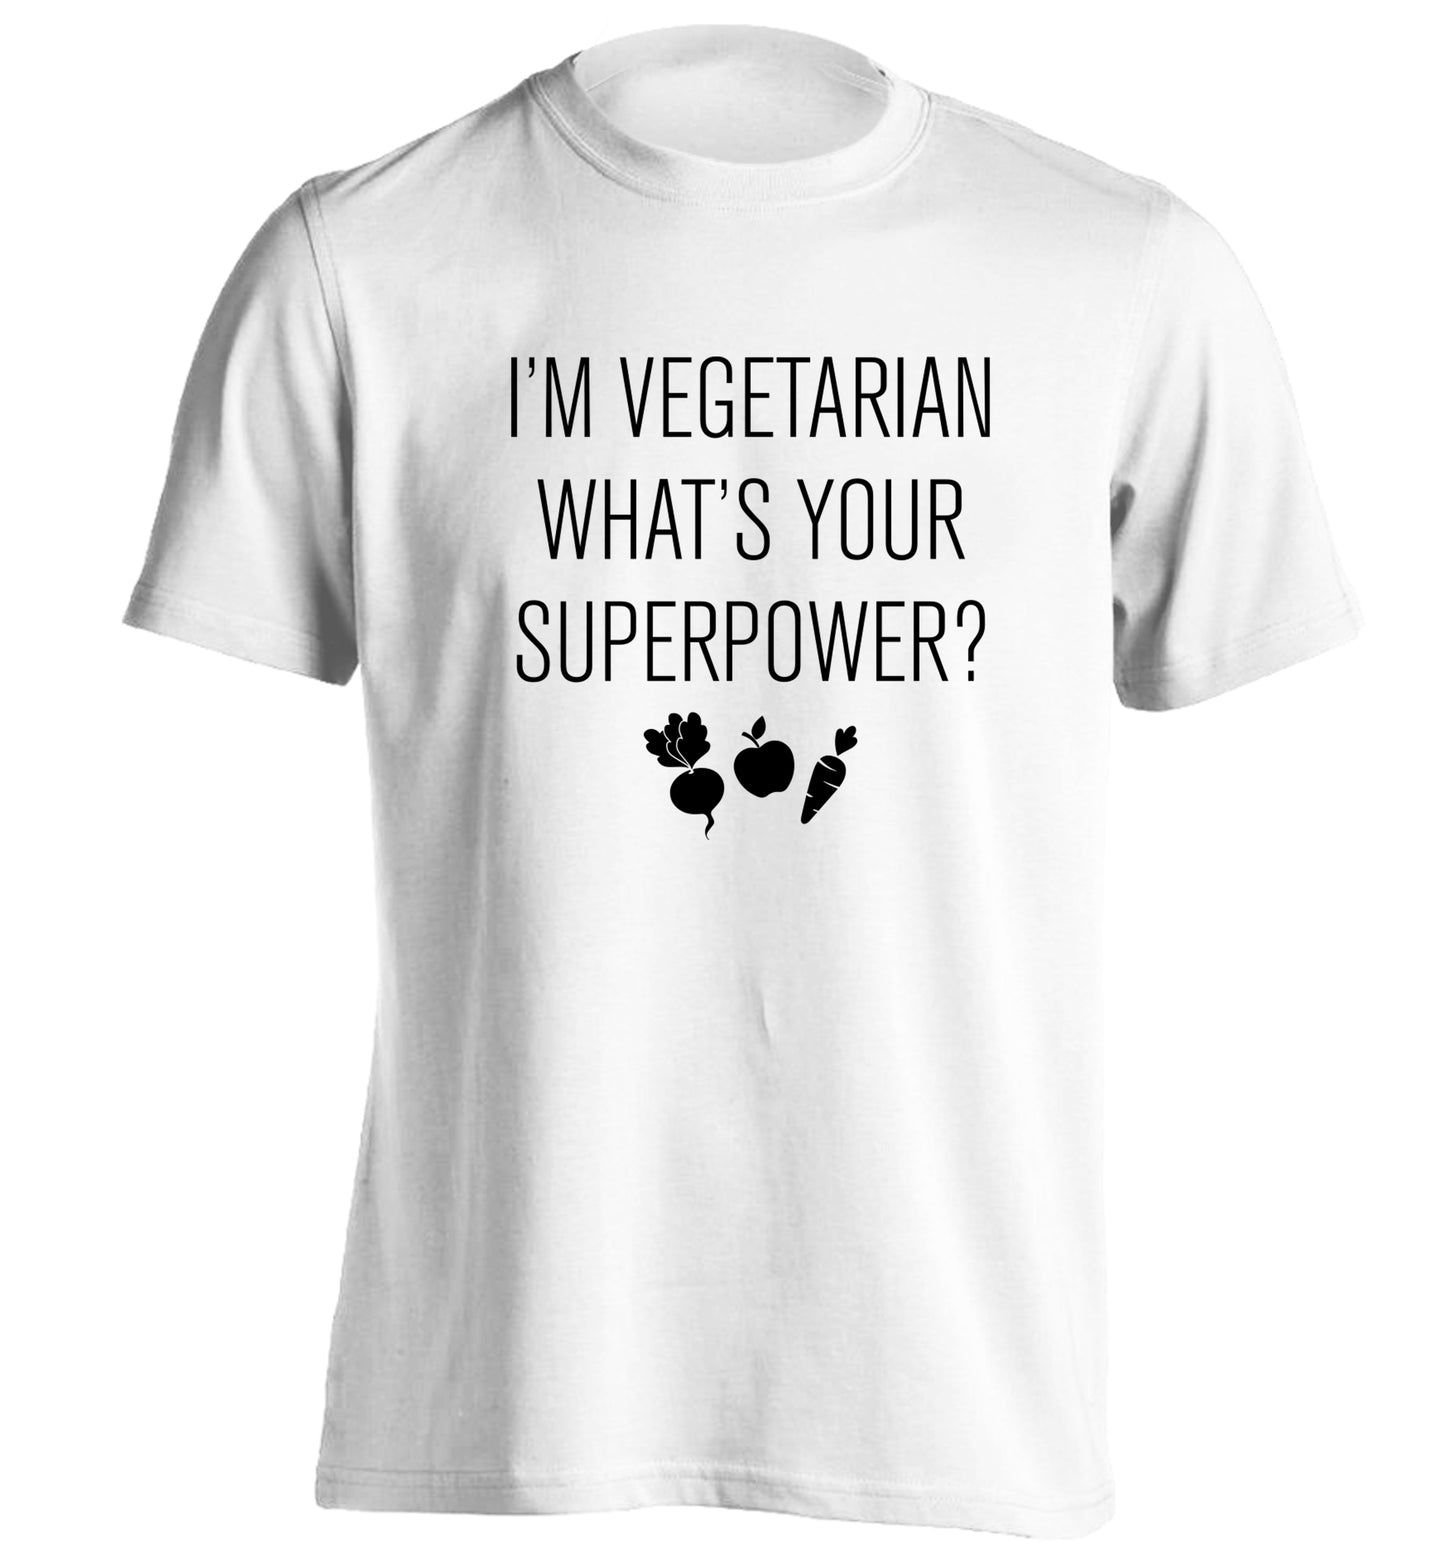 I'm vegetarian what's your superpower? adults unisex white Tshirt 2XL